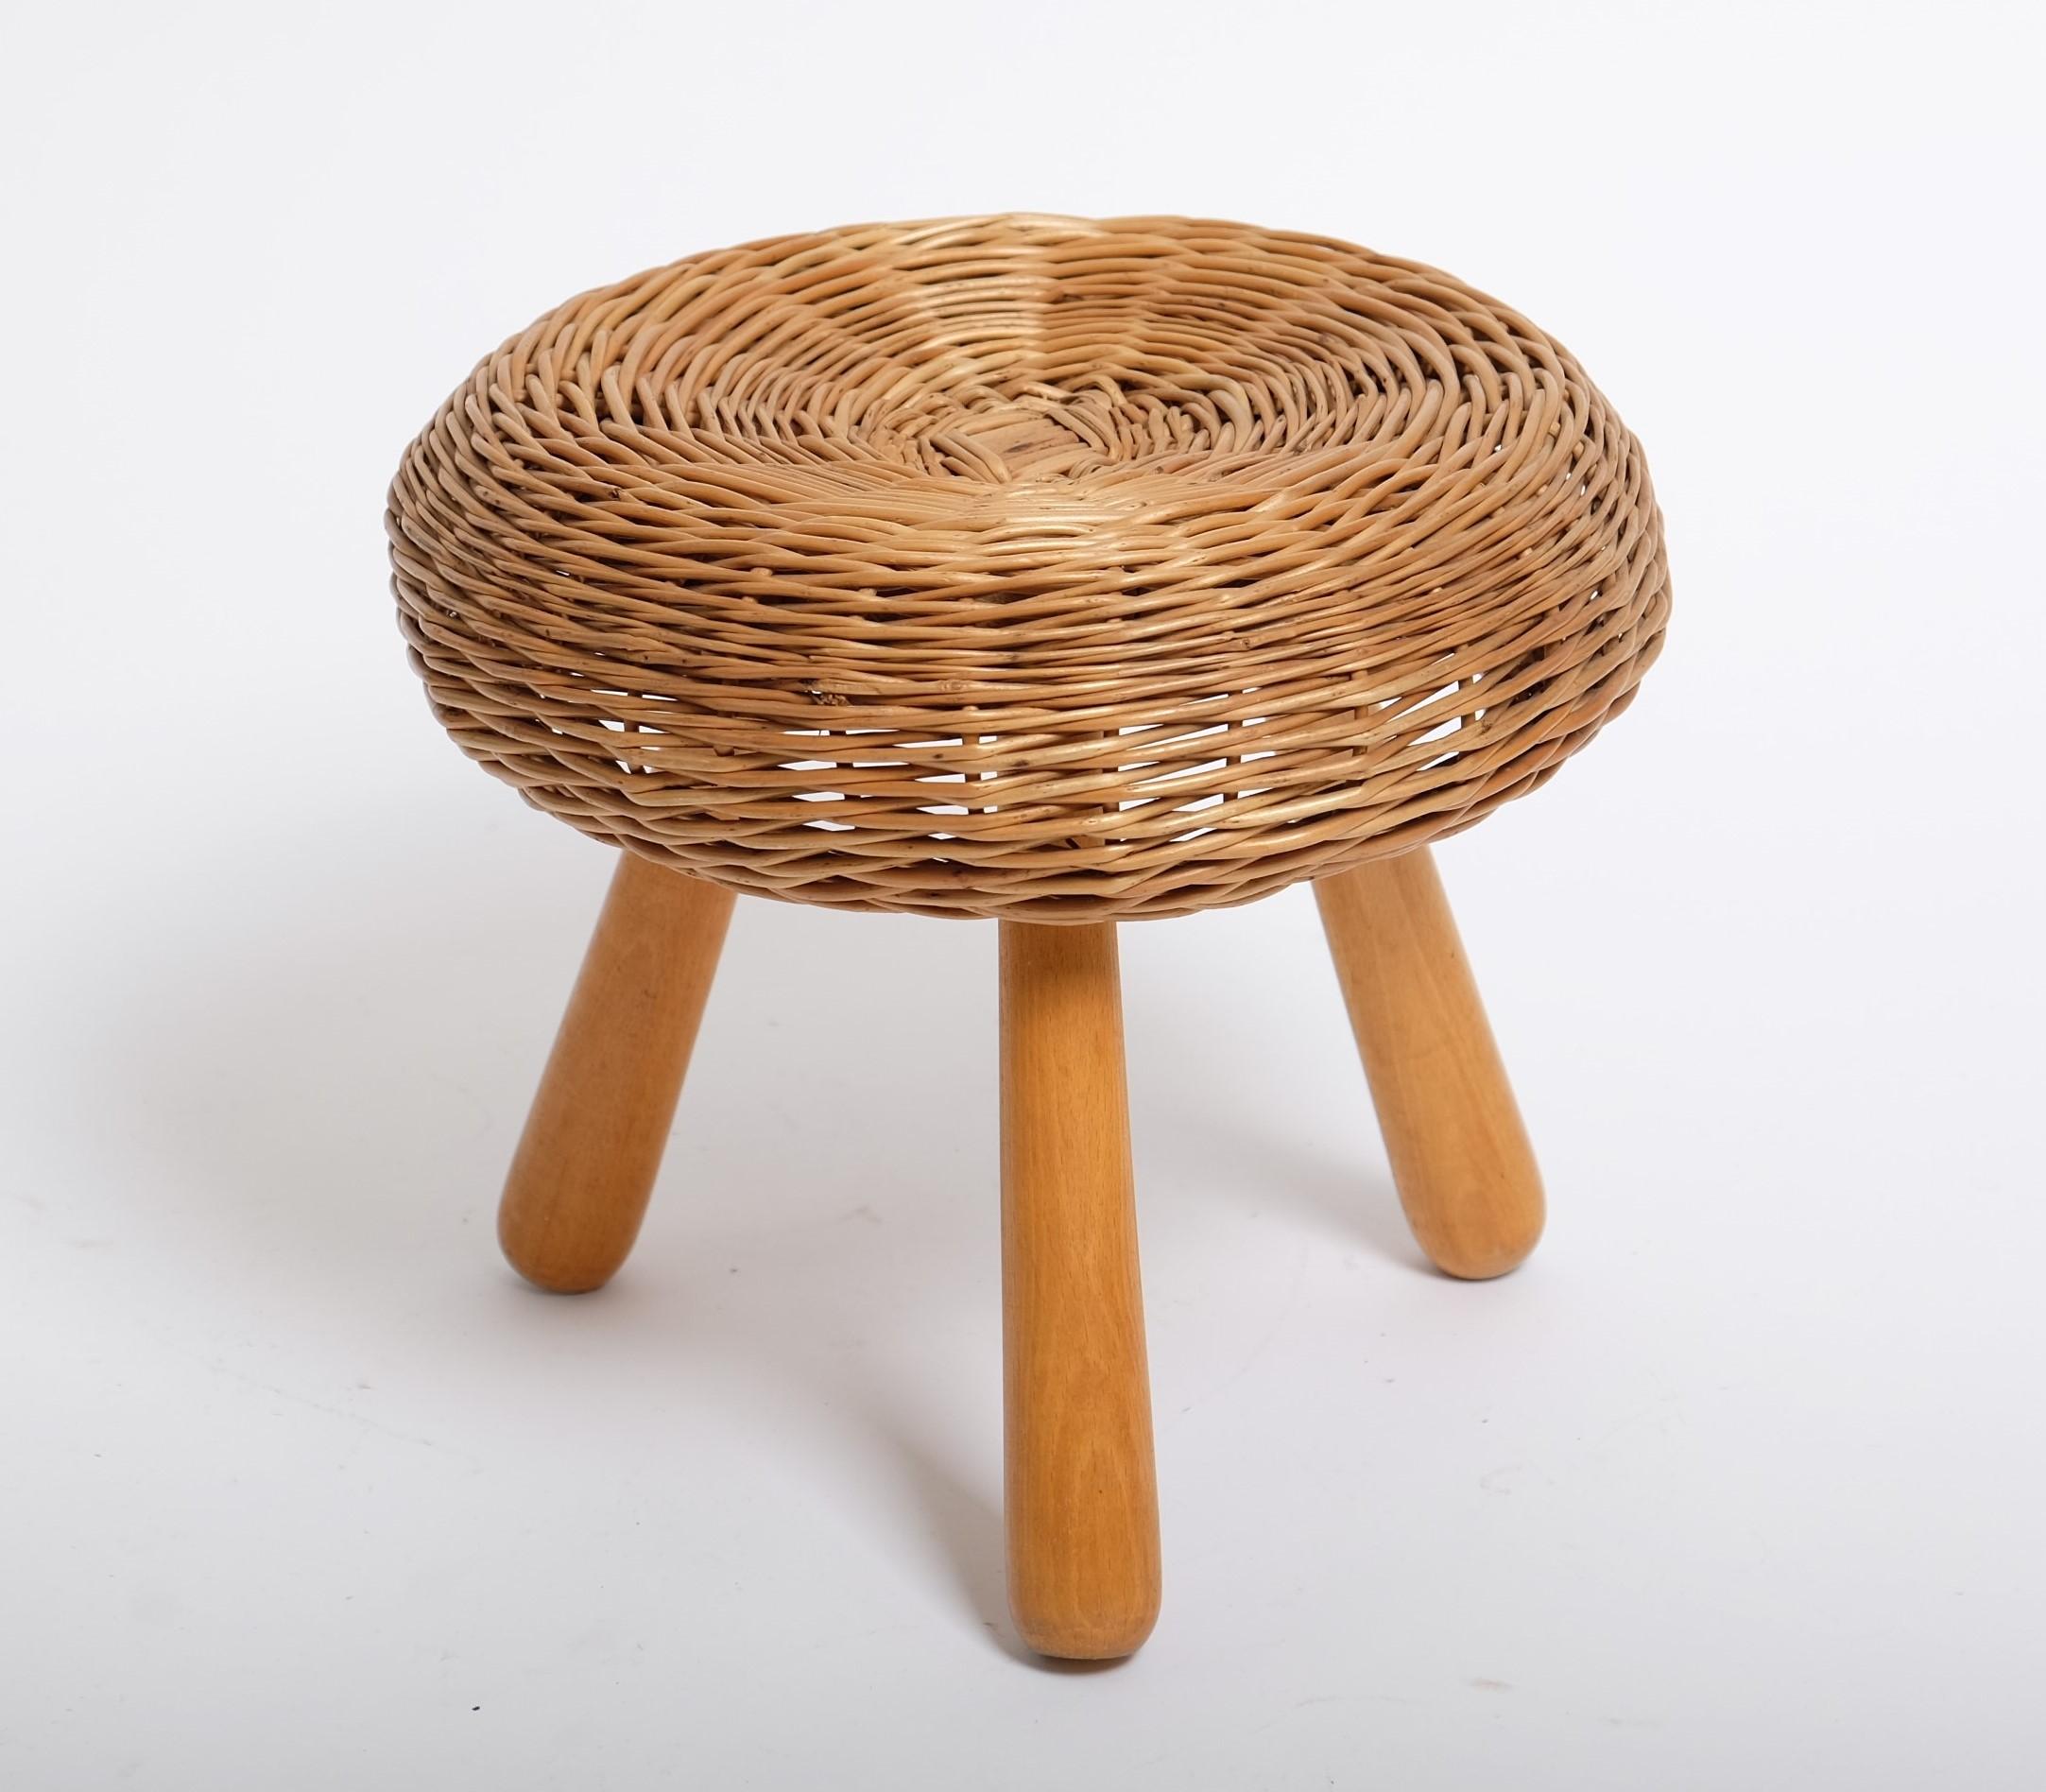 Mid-century modern stool, made of wicker and wood, attributed to Tony Paul, United States, 1950s.

Very good vintage condition without damage. The three legs can be unscrewed.

Dimensions:
Heighth: 11.4